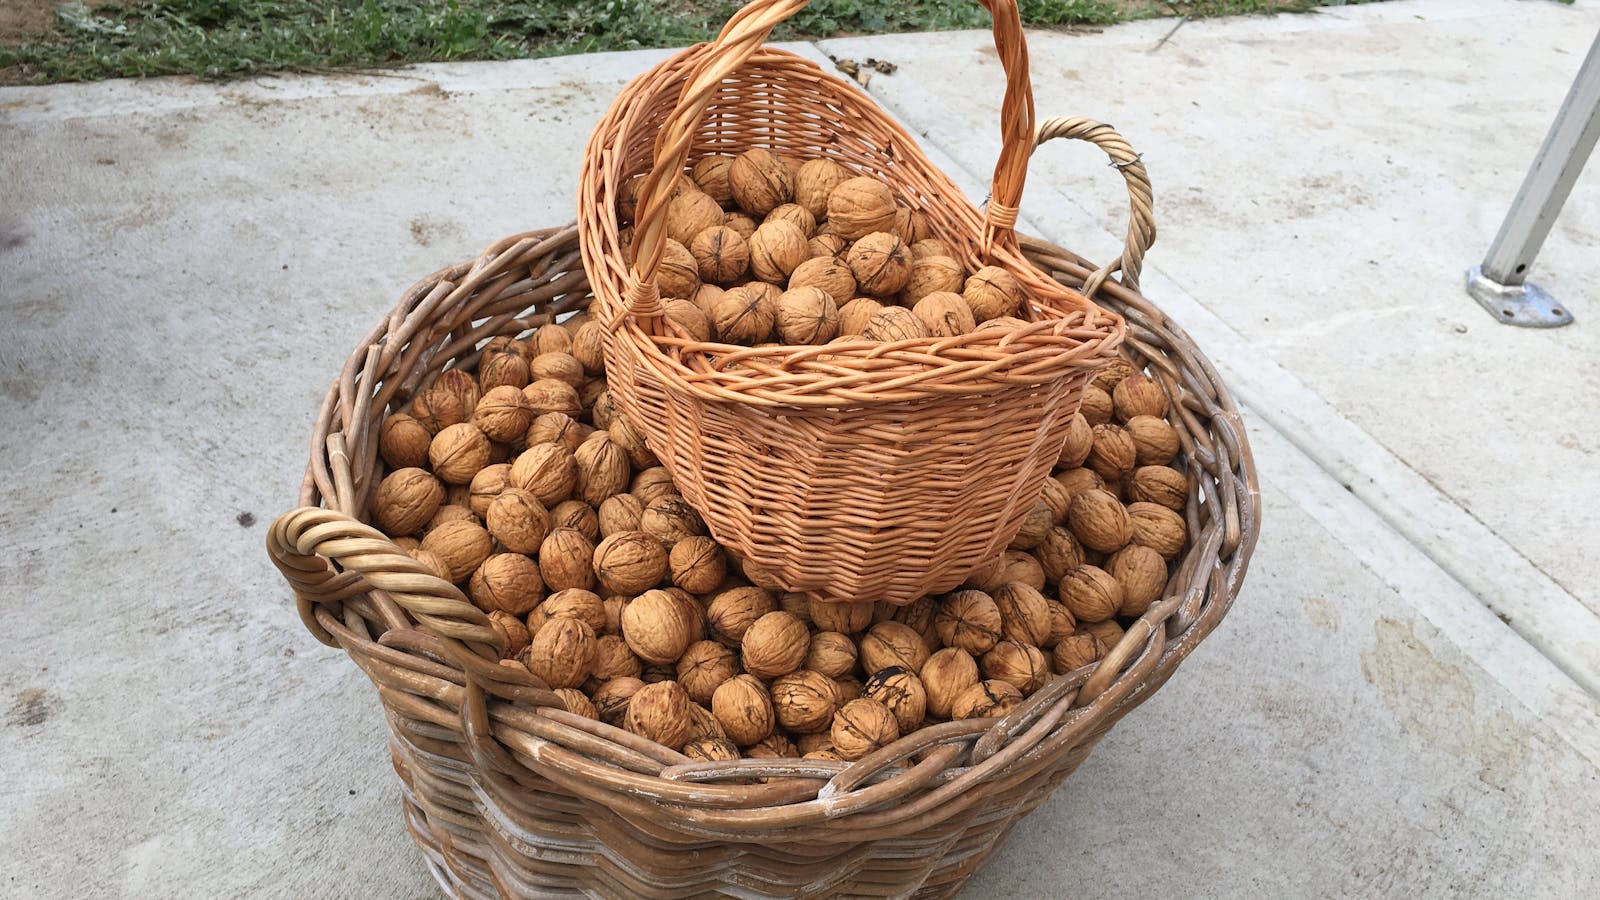 The freshly collected walnut bounty.